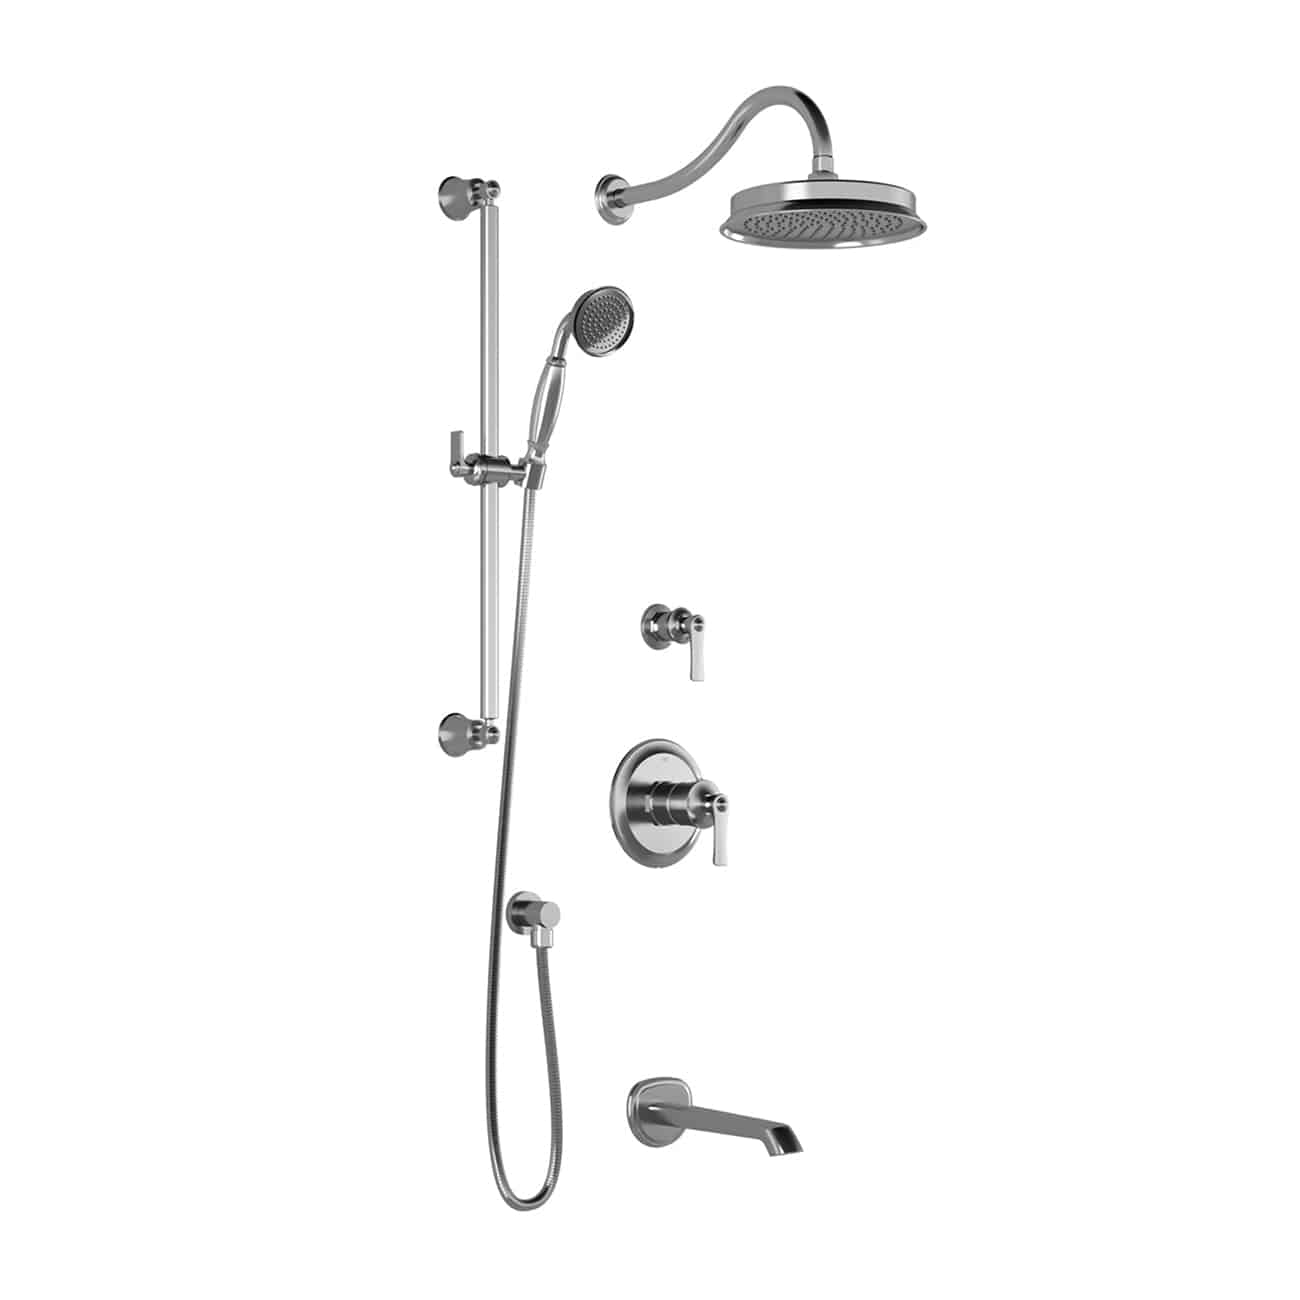 Kalia Rustik TD3 : Aquatonik T/P Shower System With 9" Shower Head, Hand Shower Tub Filler and Wall Arm- Chrome